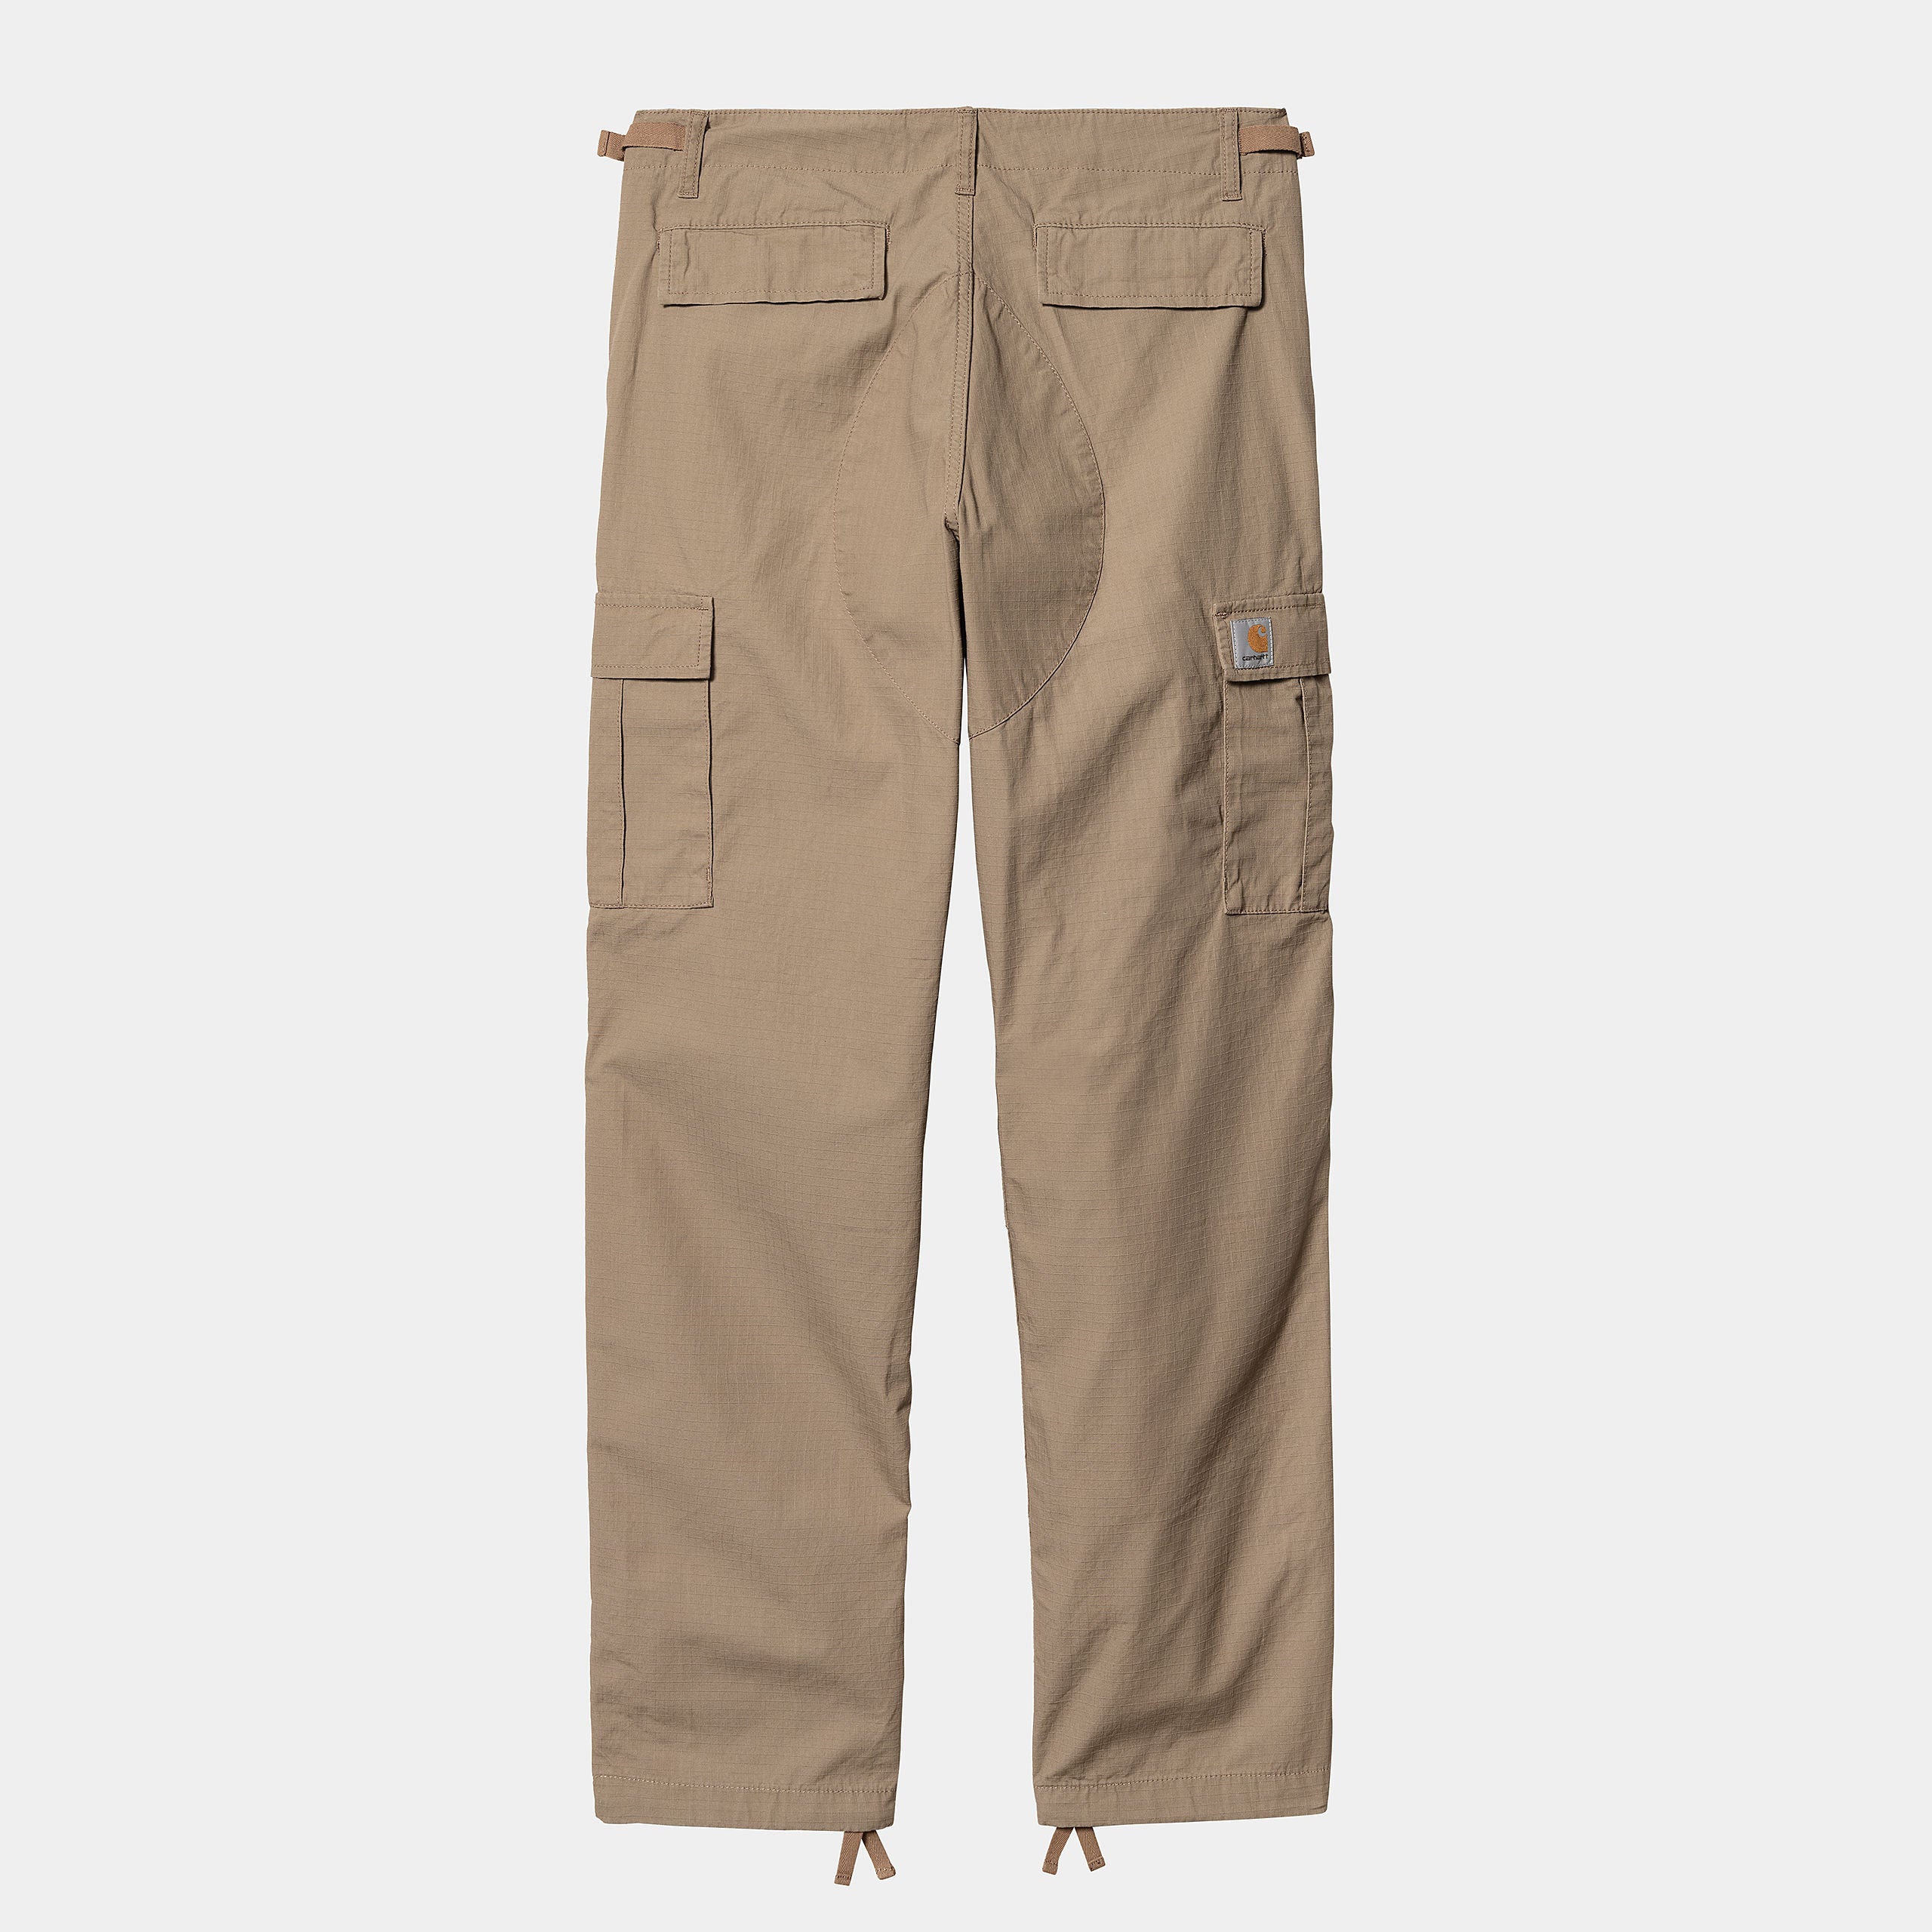 Carhartt WIP Mens Aviation Pant - Leather Rinsed